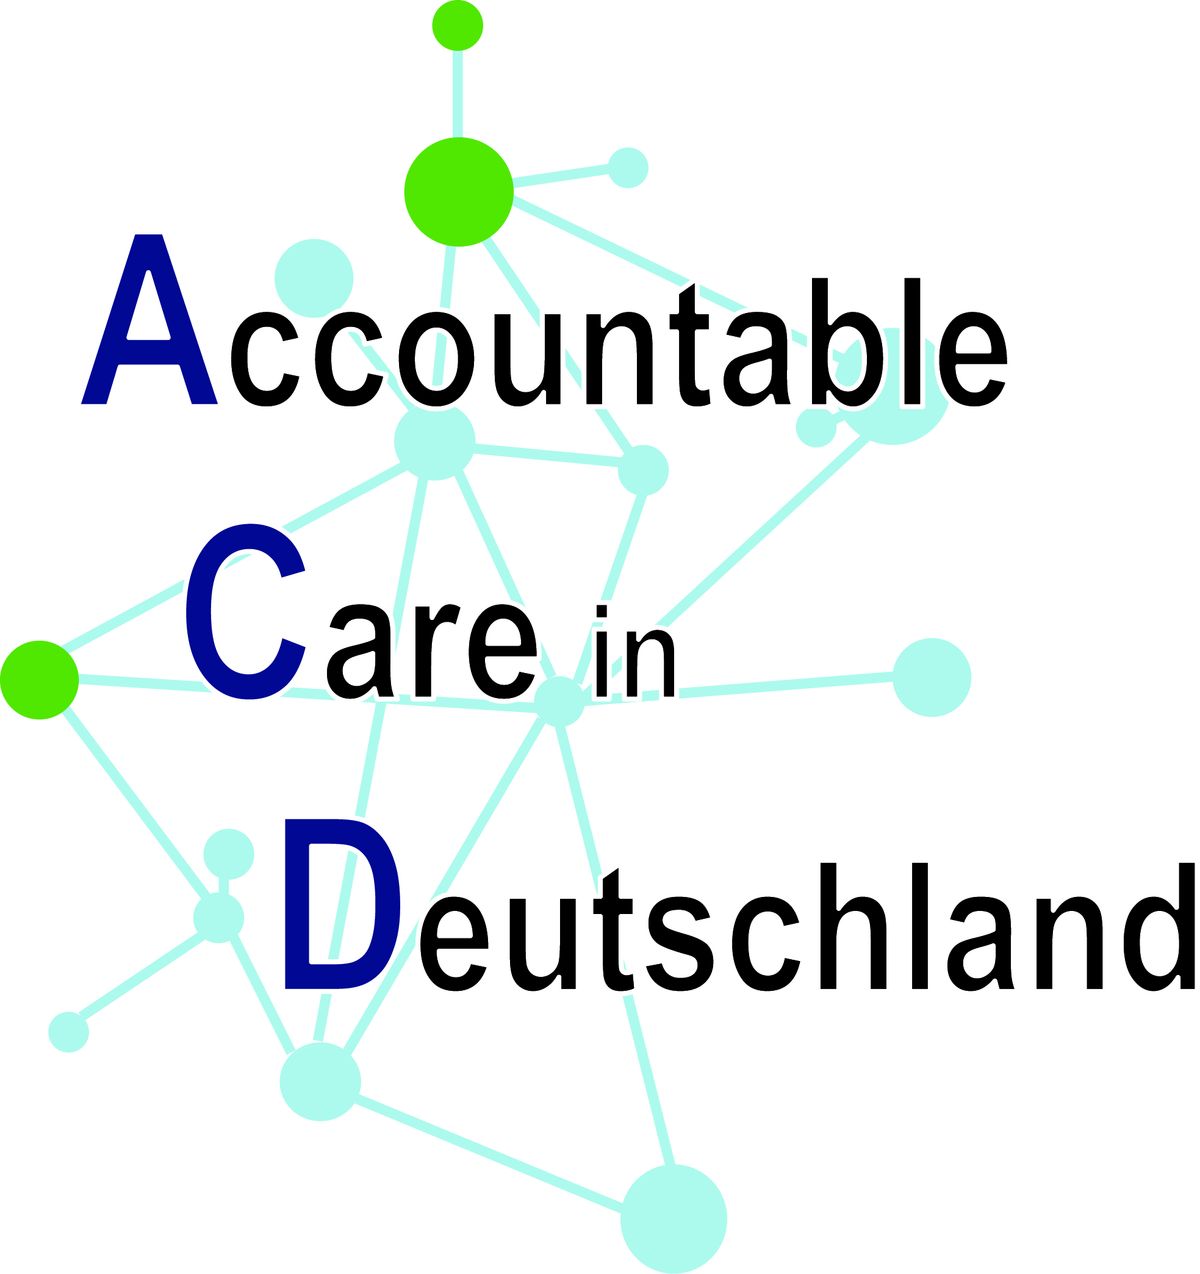 Accountable Care in Deutschland (ACD)